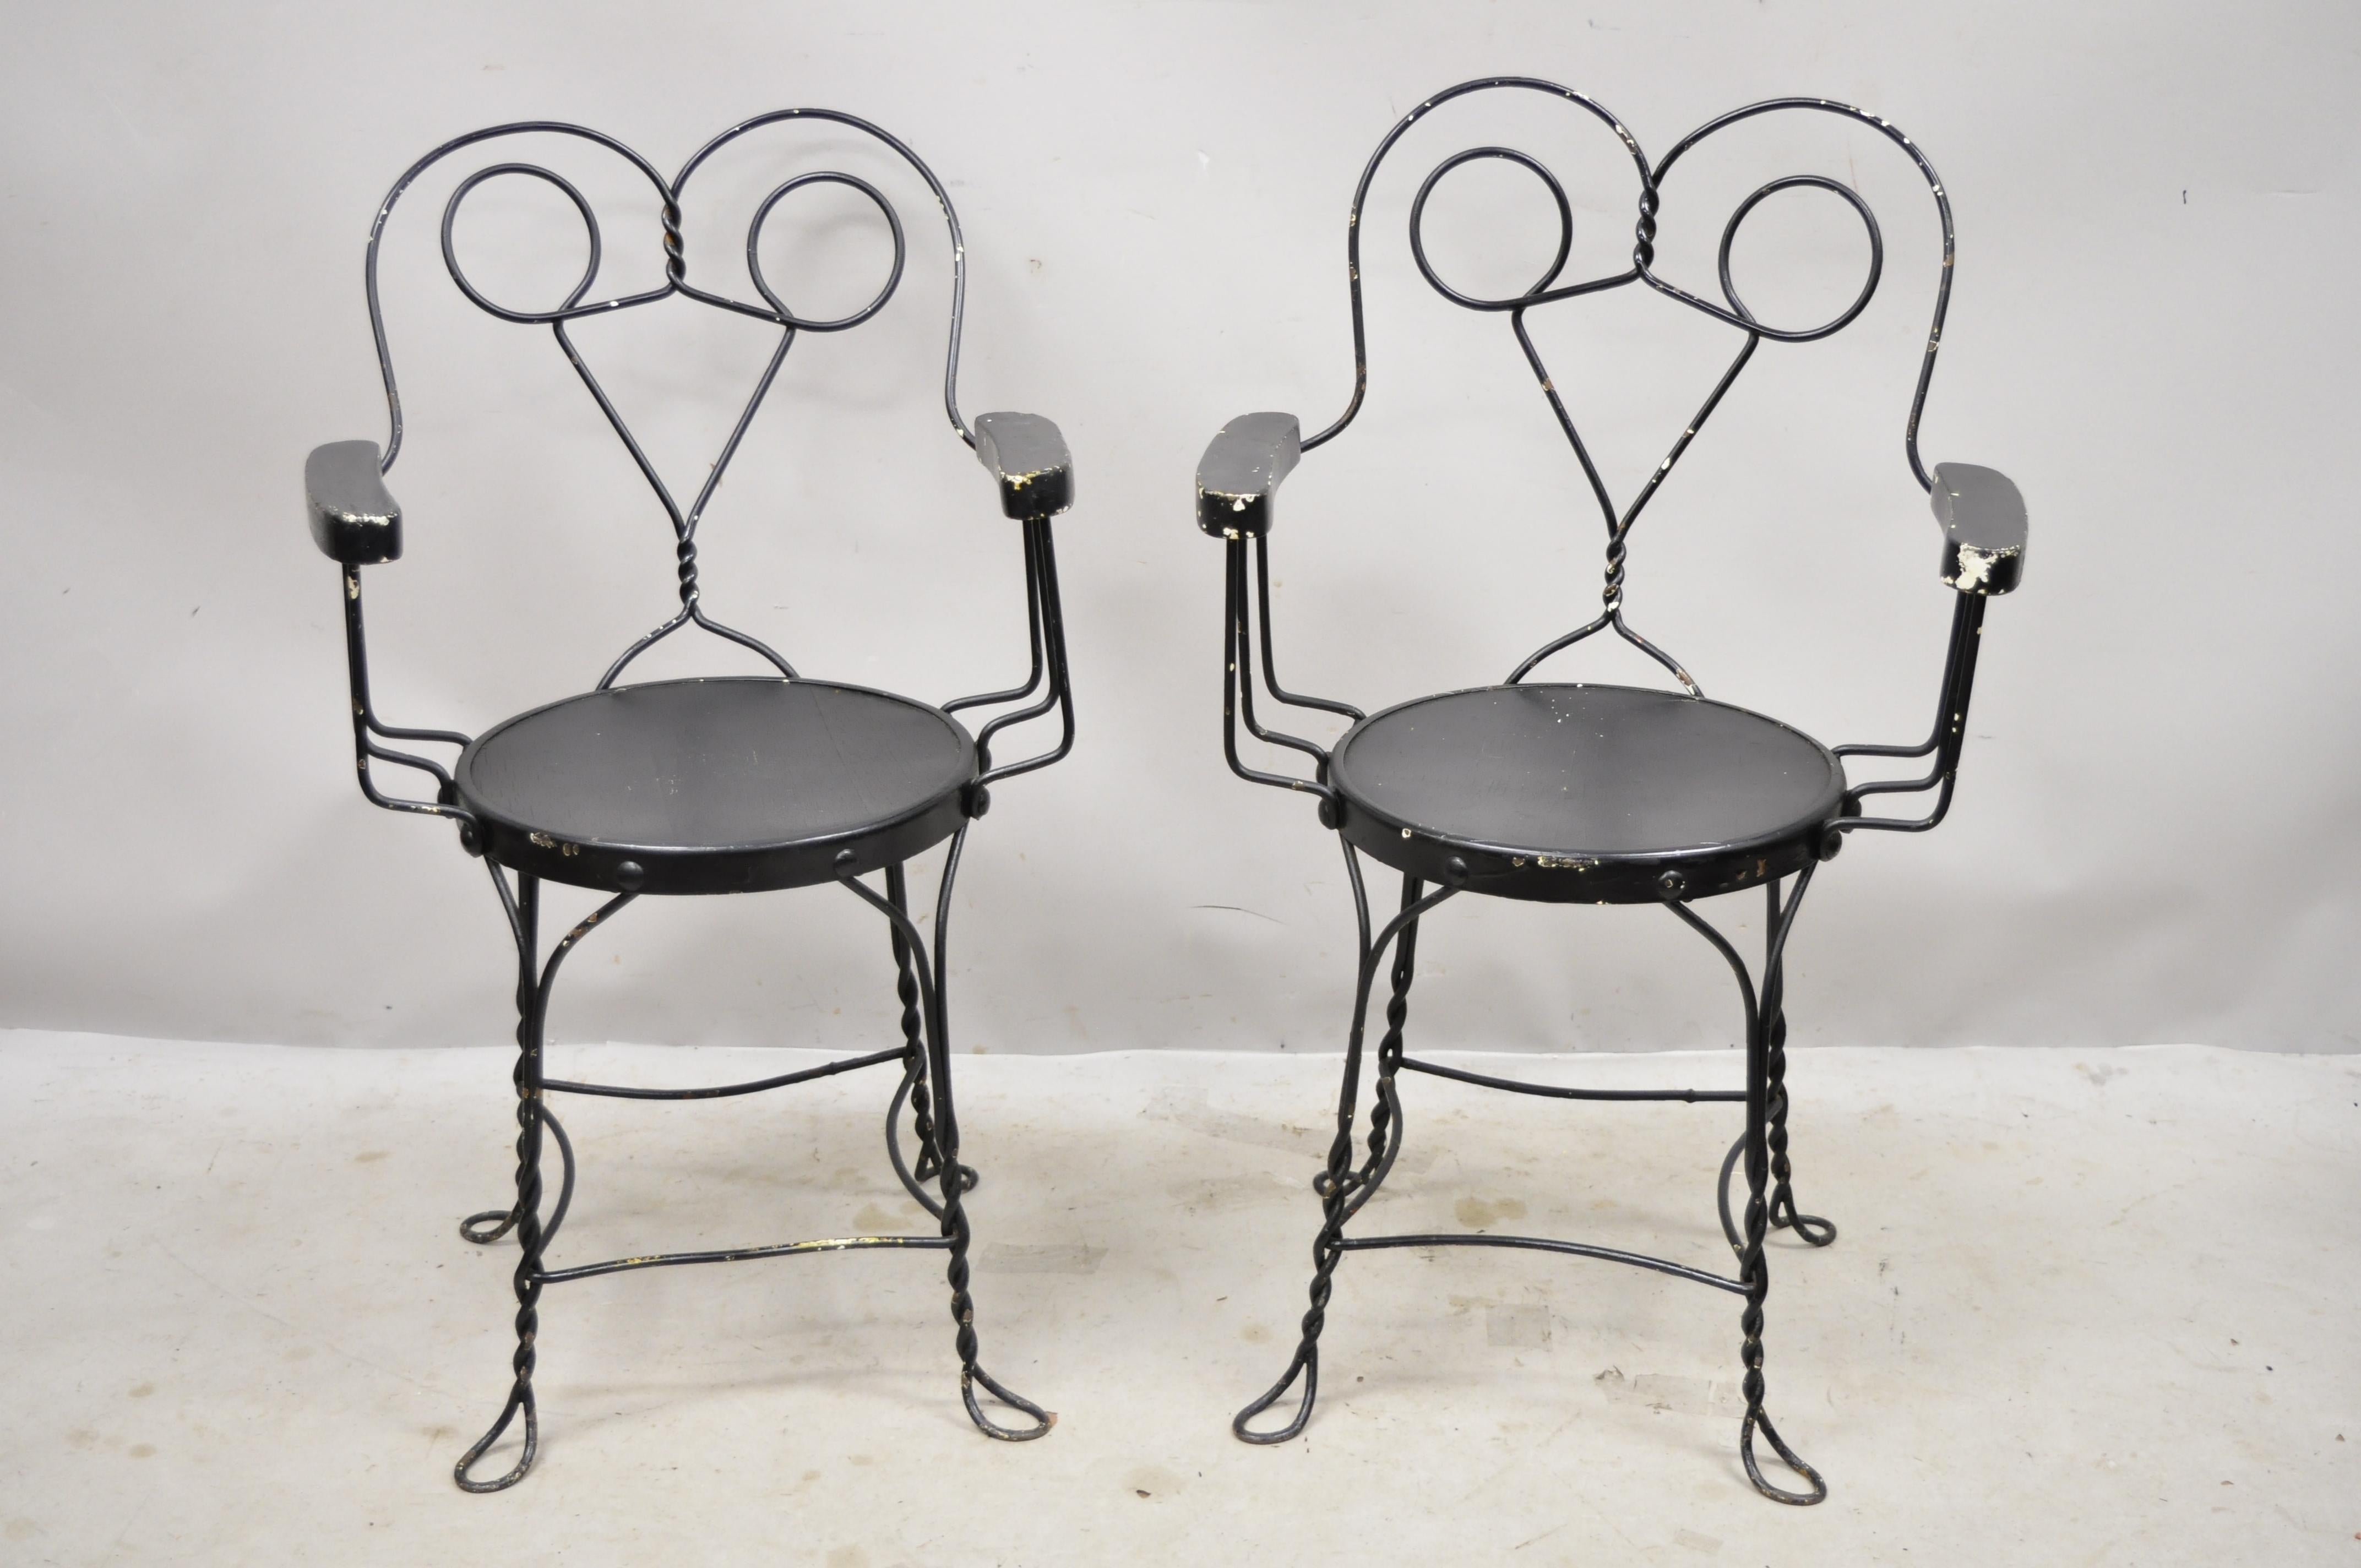 Antique wrought iron twisted metal ice cream parlor arm chairs with wood arms, pair A. Item features wooden armrests, wooden round seat, twisted metal frame, metal frames, very nice antique pair, Circa early 1900s. Measurements: 35